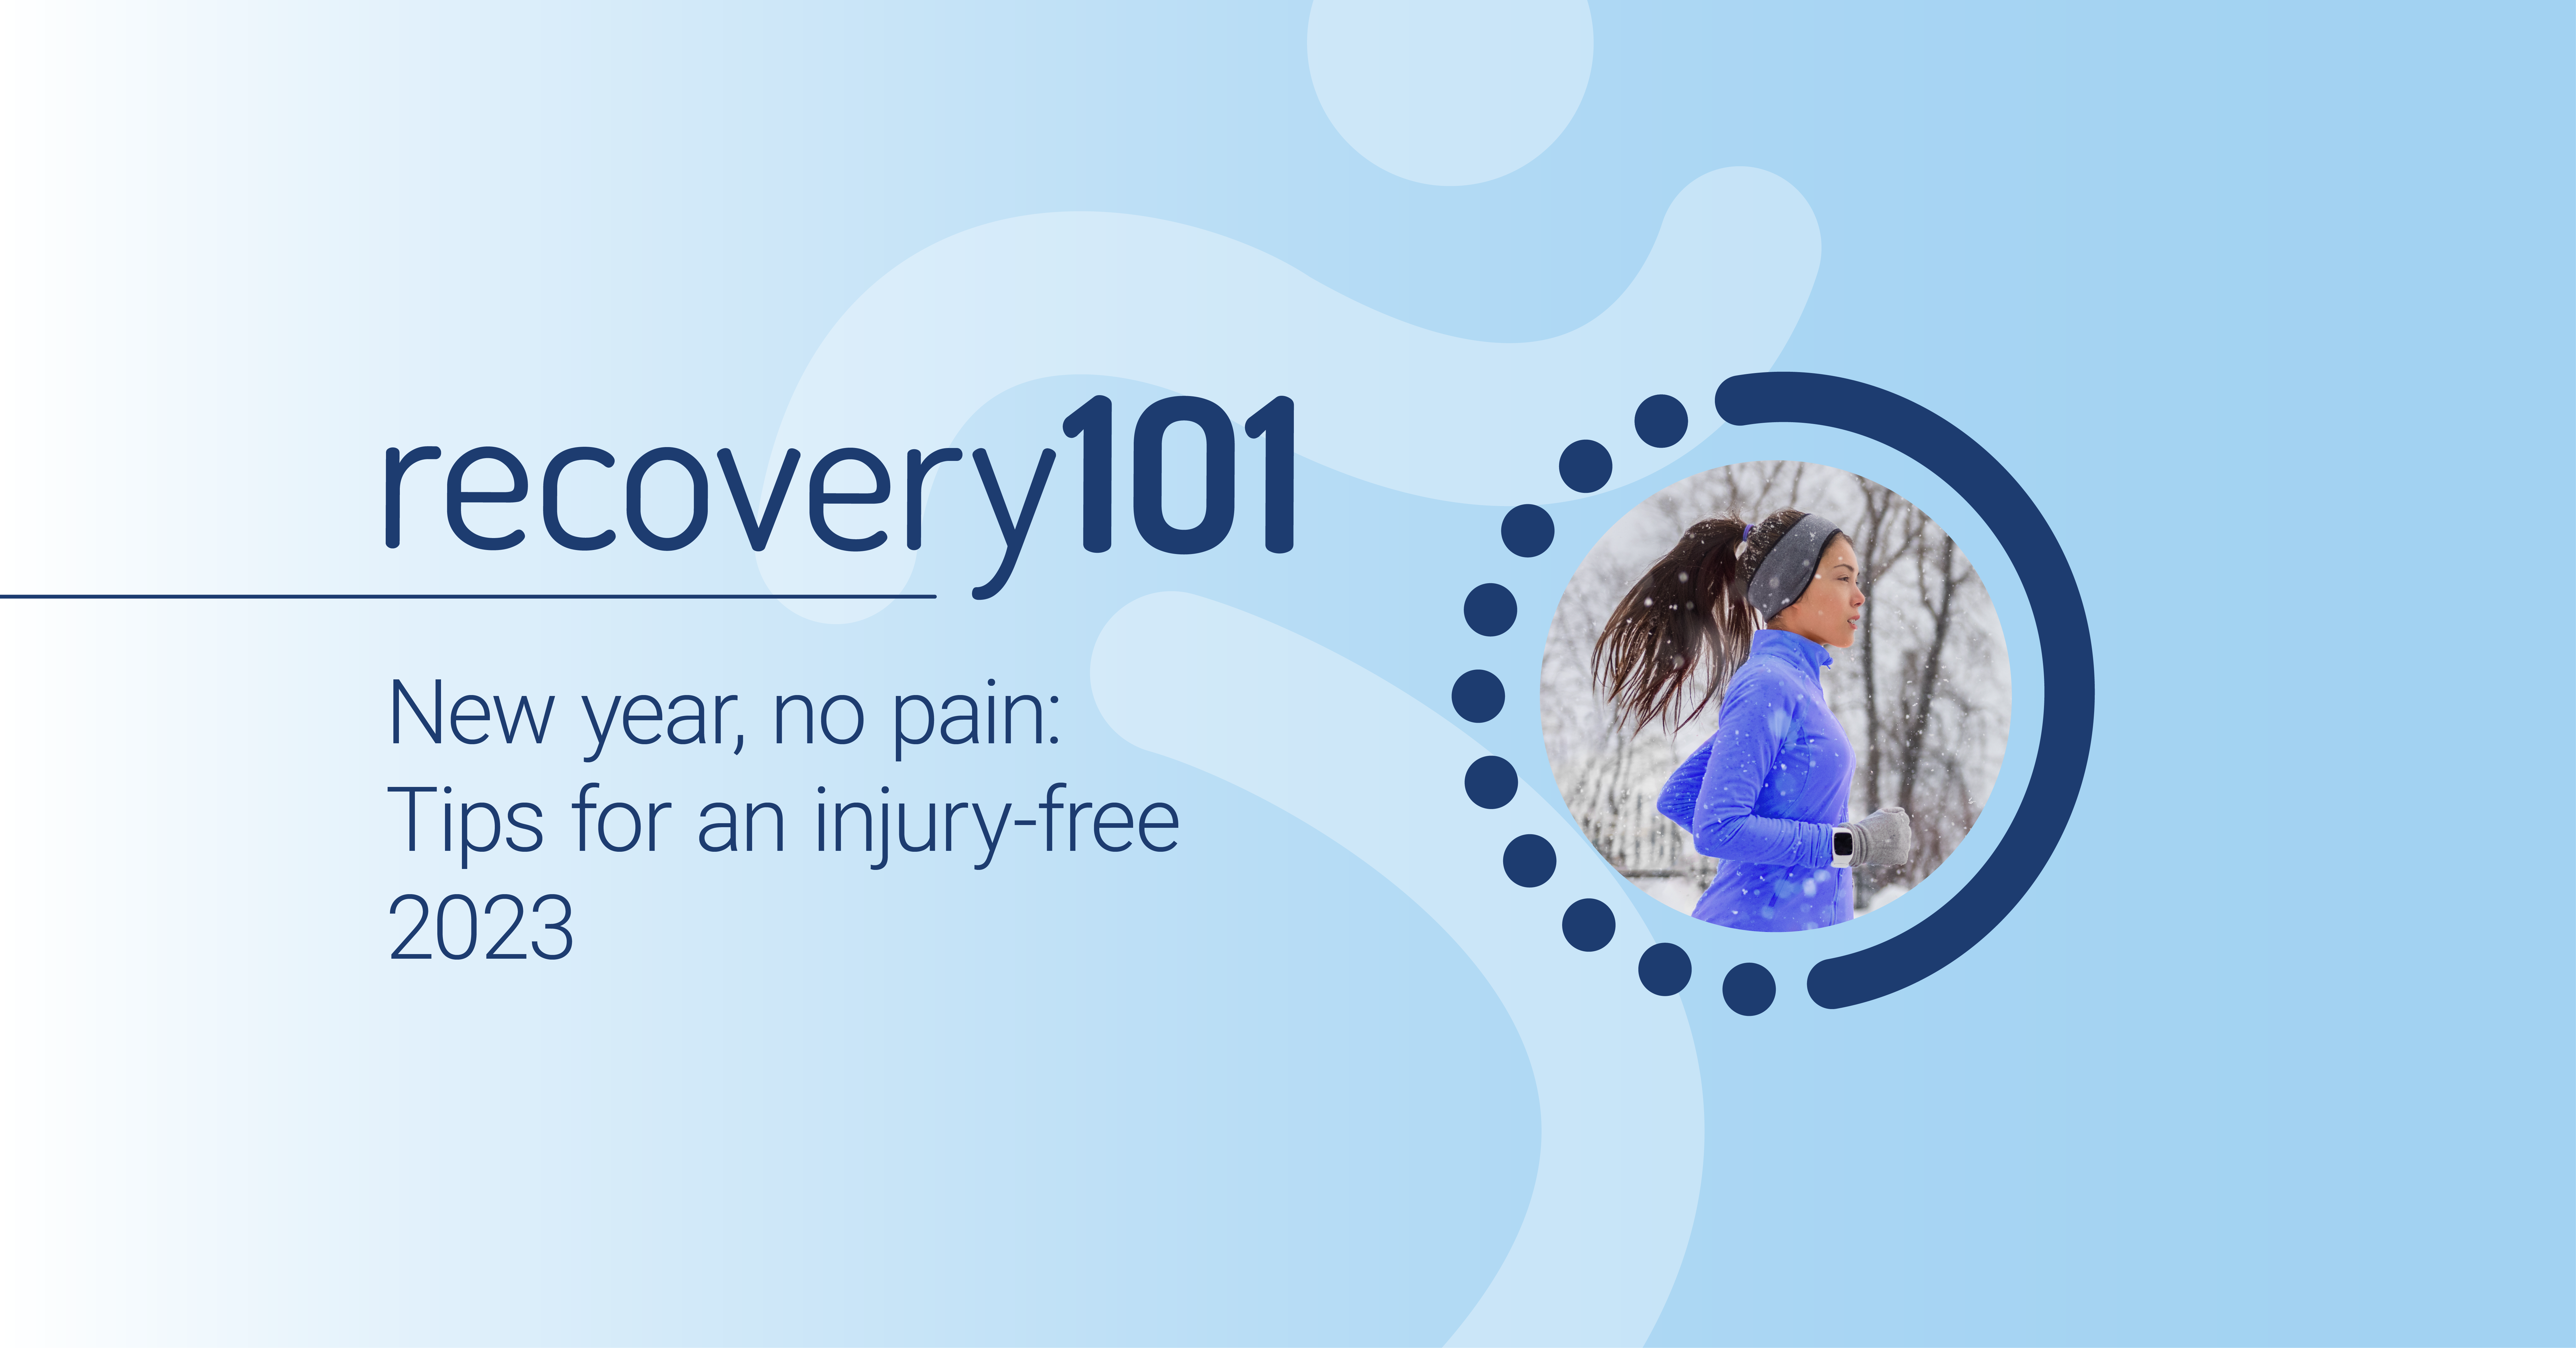 Tips for an injury-free 2023